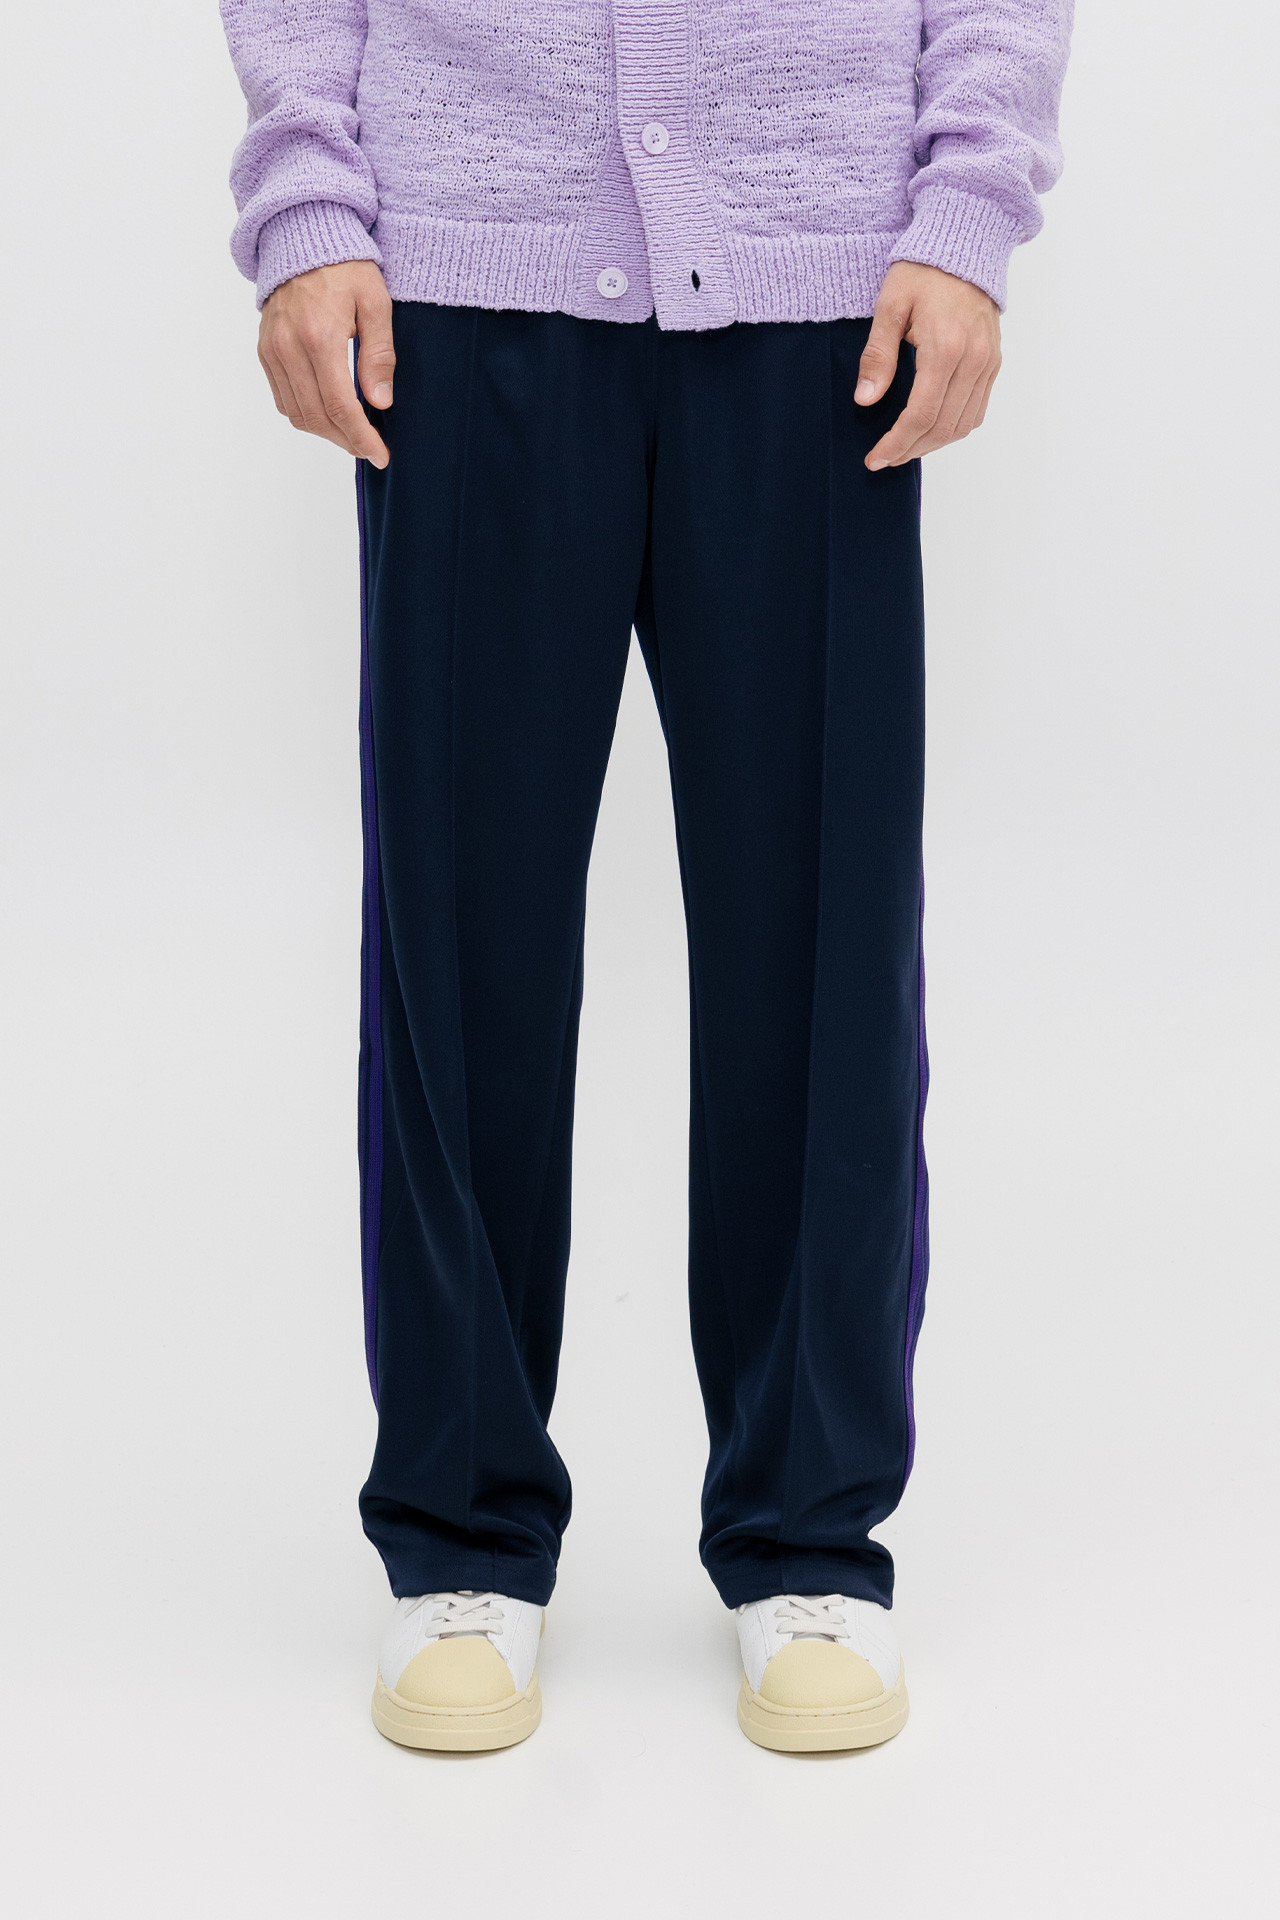 Needles Track Pant Poly Smooth Navy - Calico Club